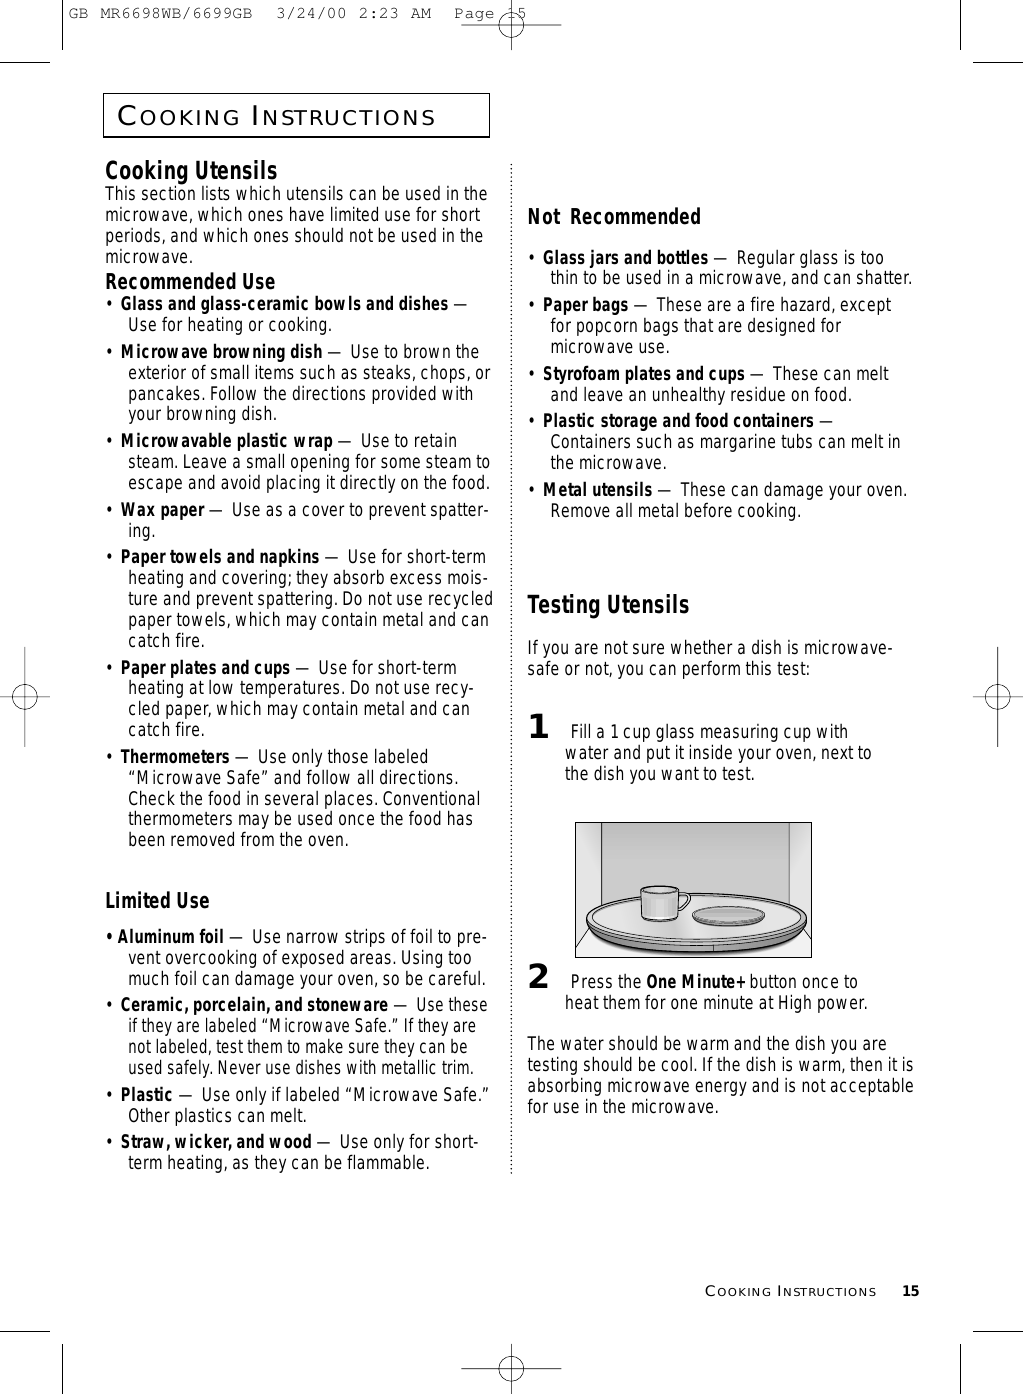 COOKINGINSTRUCTIONS15COOKINGINSTRUCTIONSCooking UtensilsThis section lists which utensils can be used in themicrowave, which ones have limited use for shortperiods, and which ones should not be used in themicrowave.Recommended Use•  Glass and glass-ceramic bowls and dishes —Use for heating or cooking.•  Microwave browning dish — Use to brown theexterior of small items such as steaks, chops, orpancakes. Follow the directions provided withyour browning dish.•  Microwavable plastic wrap — Use to retainsteam. Leave a small opening for some steam toescape and avoid placing it directly on the food.•  Wax paper — Use as a cover to prevent spatter-ing.•  Paper towels and napkins — Use for short-termheating and covering; they absorb excess mois-ture and prevent spattering. Do not use recycledpaper towels, which may contain metal and cancatch fire.•  Paper plates and cups — Use for short-termheating at low temperatures. Do not use recy-cled paper, which may contain metal and cancatch fire.•  Thermometers — Use only those labeled“Microwave Safe” and follow all directions.Check the food in several places. Conventionalthermometers may be used once the food hasbeen removed from the oven.Limited Use• Aluminum foil — Use narrow strips of foil to pre-vent overcooking of exposed areas. Using toomuch foil can damage your oven, so be careful.•  Ceramic, porcelain, and stoneware — Use theseif they are labeled “Microwave Safe.” If they arenot labeled, test them to make sure they can beused safely. Never use dishes with metallic trim.•  Plastic — Use only if labeled “Microwave Safe.”Other plastics can melt.•  Straw, wicker, and wood — Use only for short-term heating, as they can be flammable.Not  Recommended•  Glass jars and bottles — Regular glass is toothin to be used in a microwave, and can shatter.•  Paper bags — These are a fire hazard, exceptfor popcorn bags that are designed formicrowave use.•  Styrofoam plates and cups — These can meltand leave an unhealthy residue on food.•  Plastic storage and food containers —Containers such as margarine tubs can melt inthe microwave.•  Metal utensils — These can damage your oven.Remove all metal before cooking. Testing UtensilsIf you are not sure whether a dish is microwave-safe or not, you can perform this test:1Fill a 1 cup glass measuring cup withwater and put it inside your oven, next tothe dish you want to test.2Press the One Minute+ button once toheat them for one minute at High power.The water should be warm and the dish you aretesting should be cool. If the dish is warm, then it isabsorbing microwave energy and is not acceptablefor use in the microwave.GB MR6698WB/6699GB  3/24/00 2:23 AM  Page 15